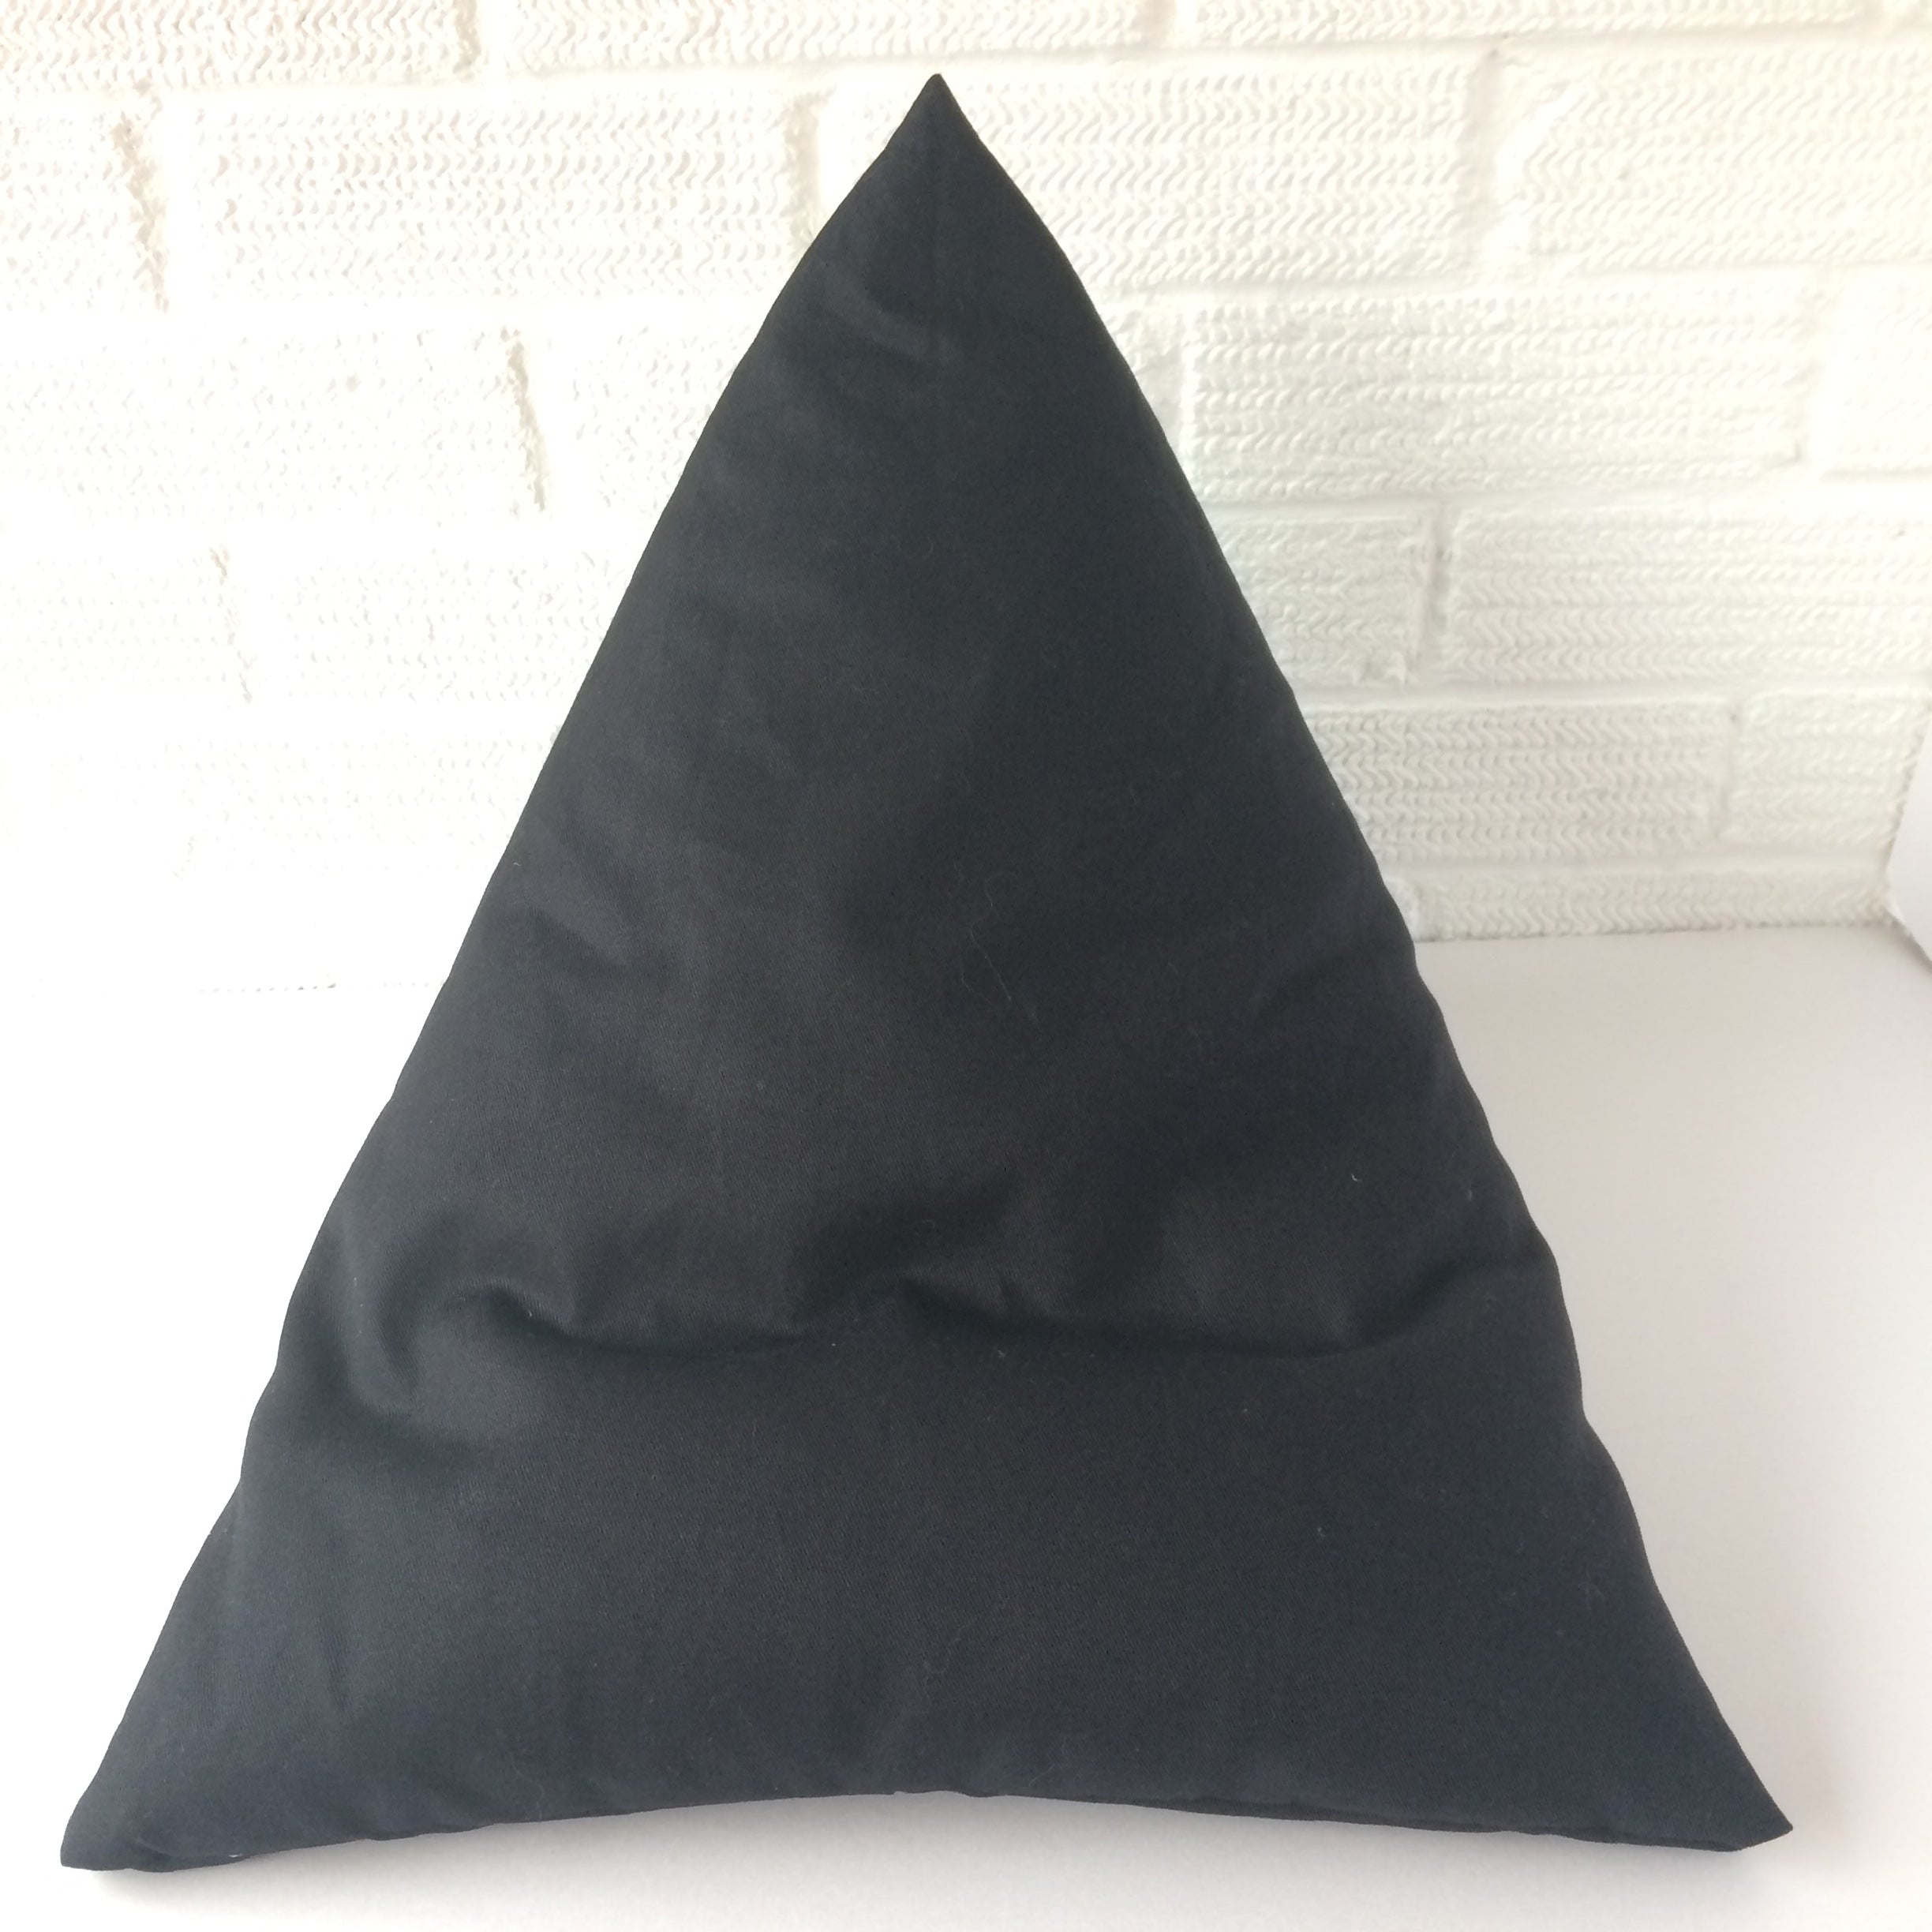 Black drill fabric Book holder bean bag style to hold your books where ever you need them.